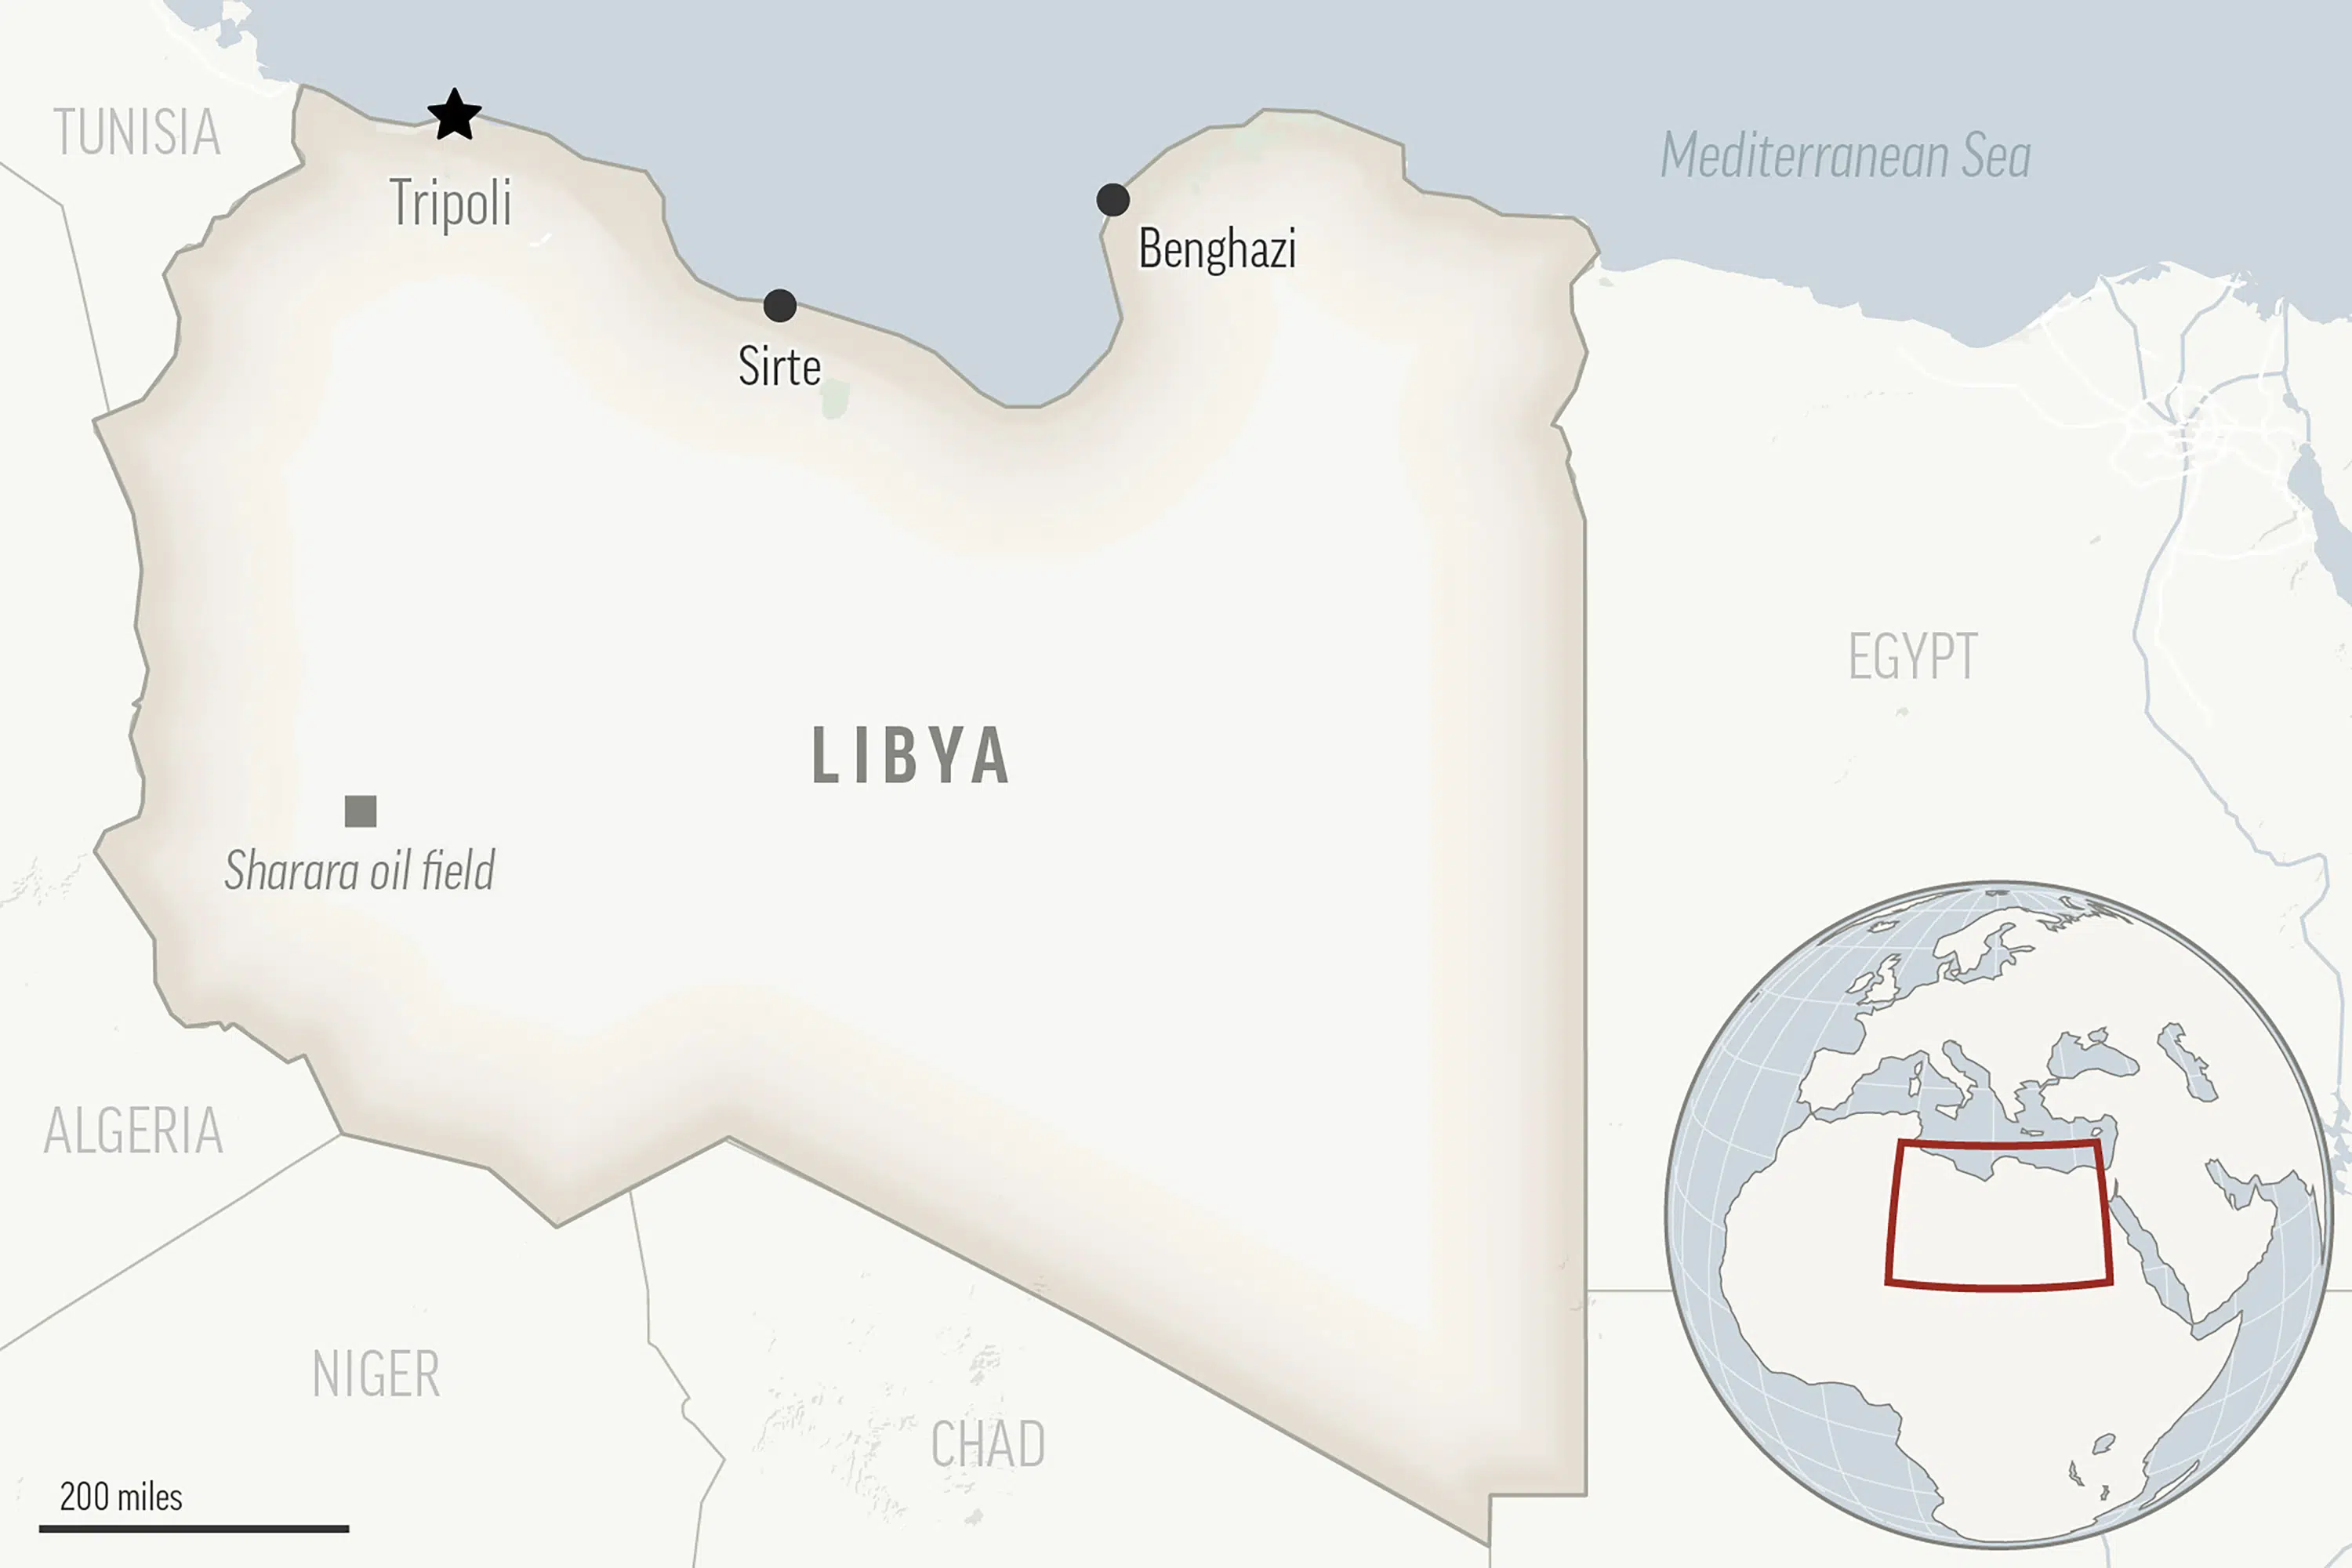 Eastern Libyan authorities round up thousands in crackdown on migrants